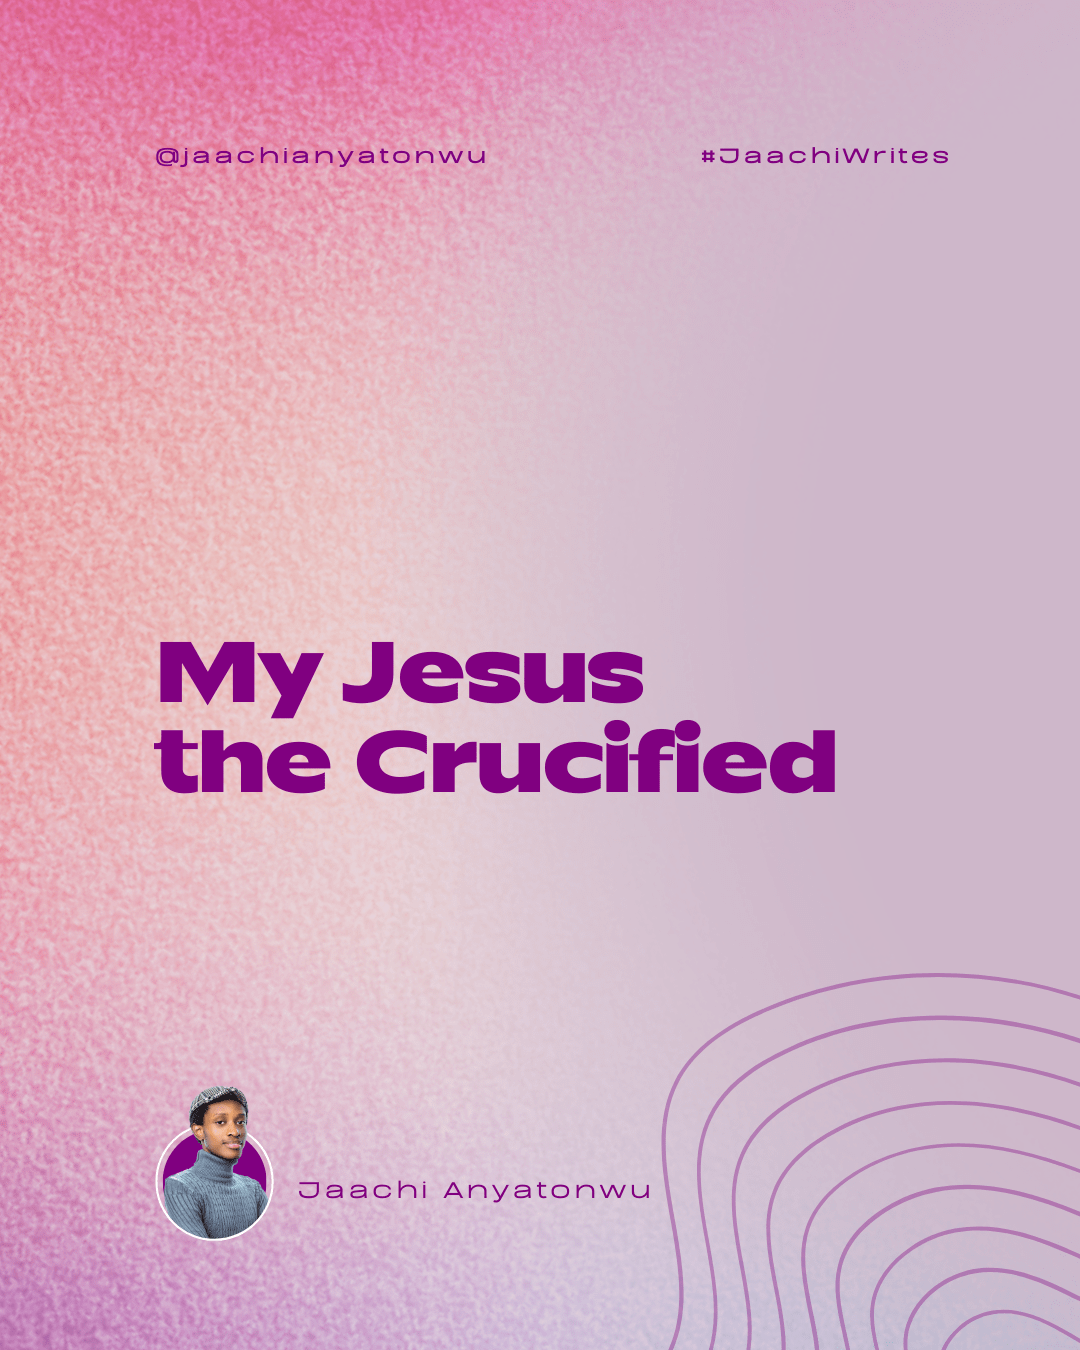 My Jesus the Crucified